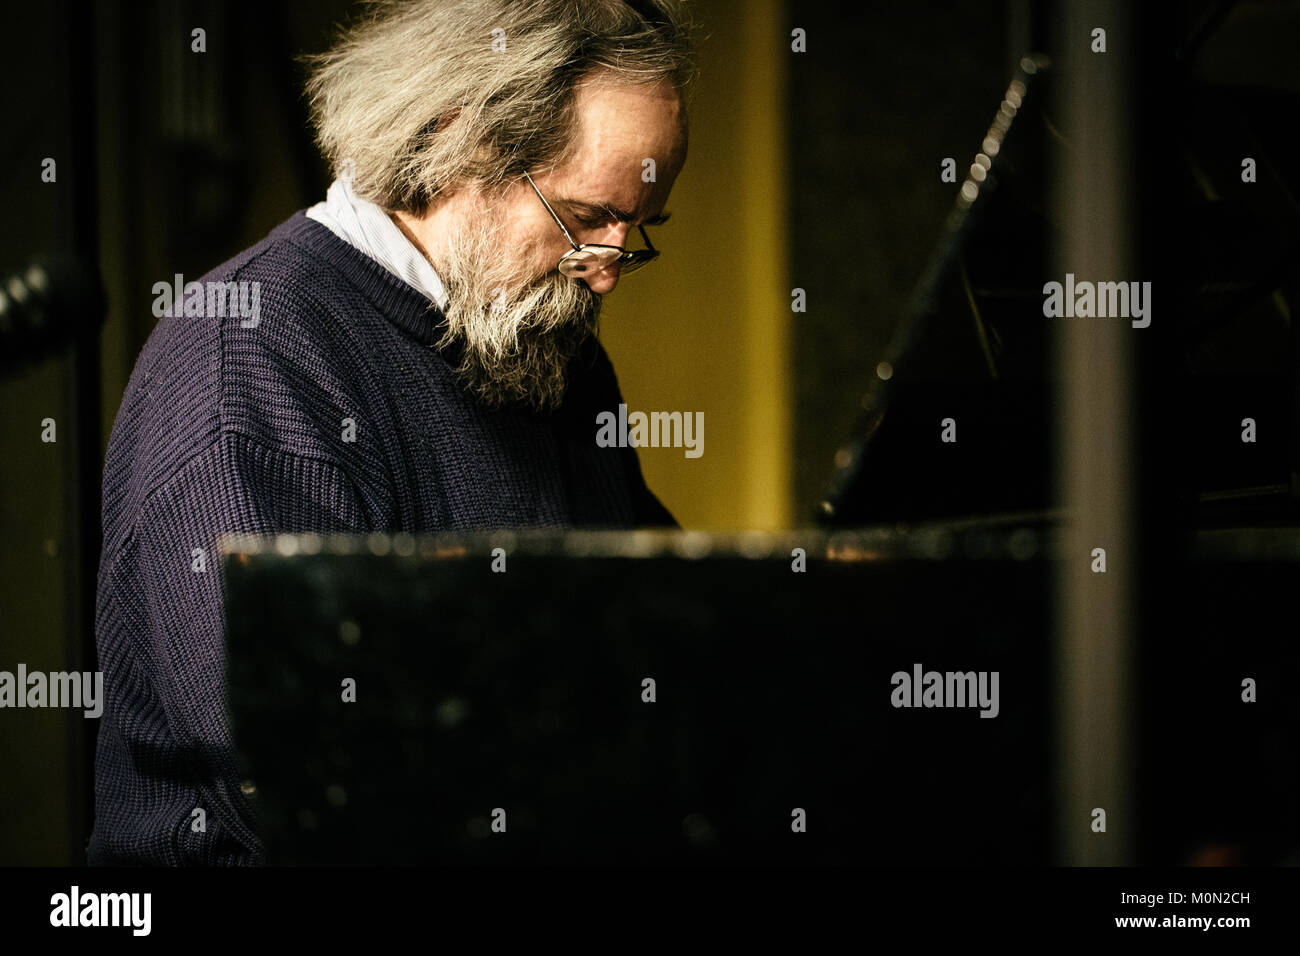 The Ukrainian composer and pianist Lubomyr Melnyk performs a live concert at the Danish music festival Frost Festival 2016 in Copenhagen. Here Melnyk is seen during the rehearsals. Denmark, 24/02 2016. Stock Photo